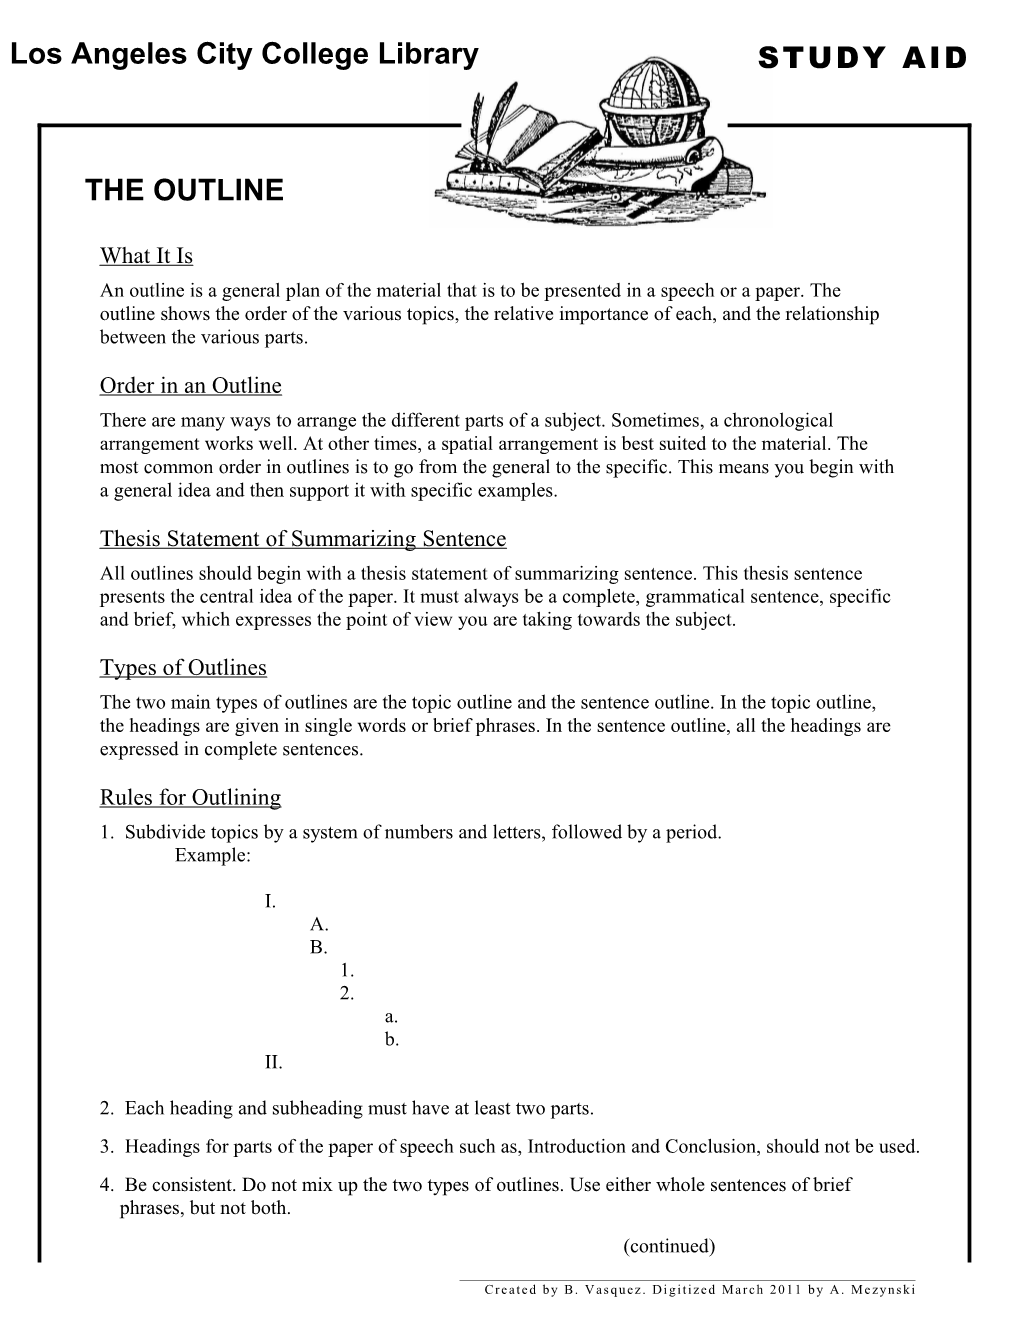 An Outline Is a General Plan of the Material That Is to Be Presented in a Speech Or a Paper